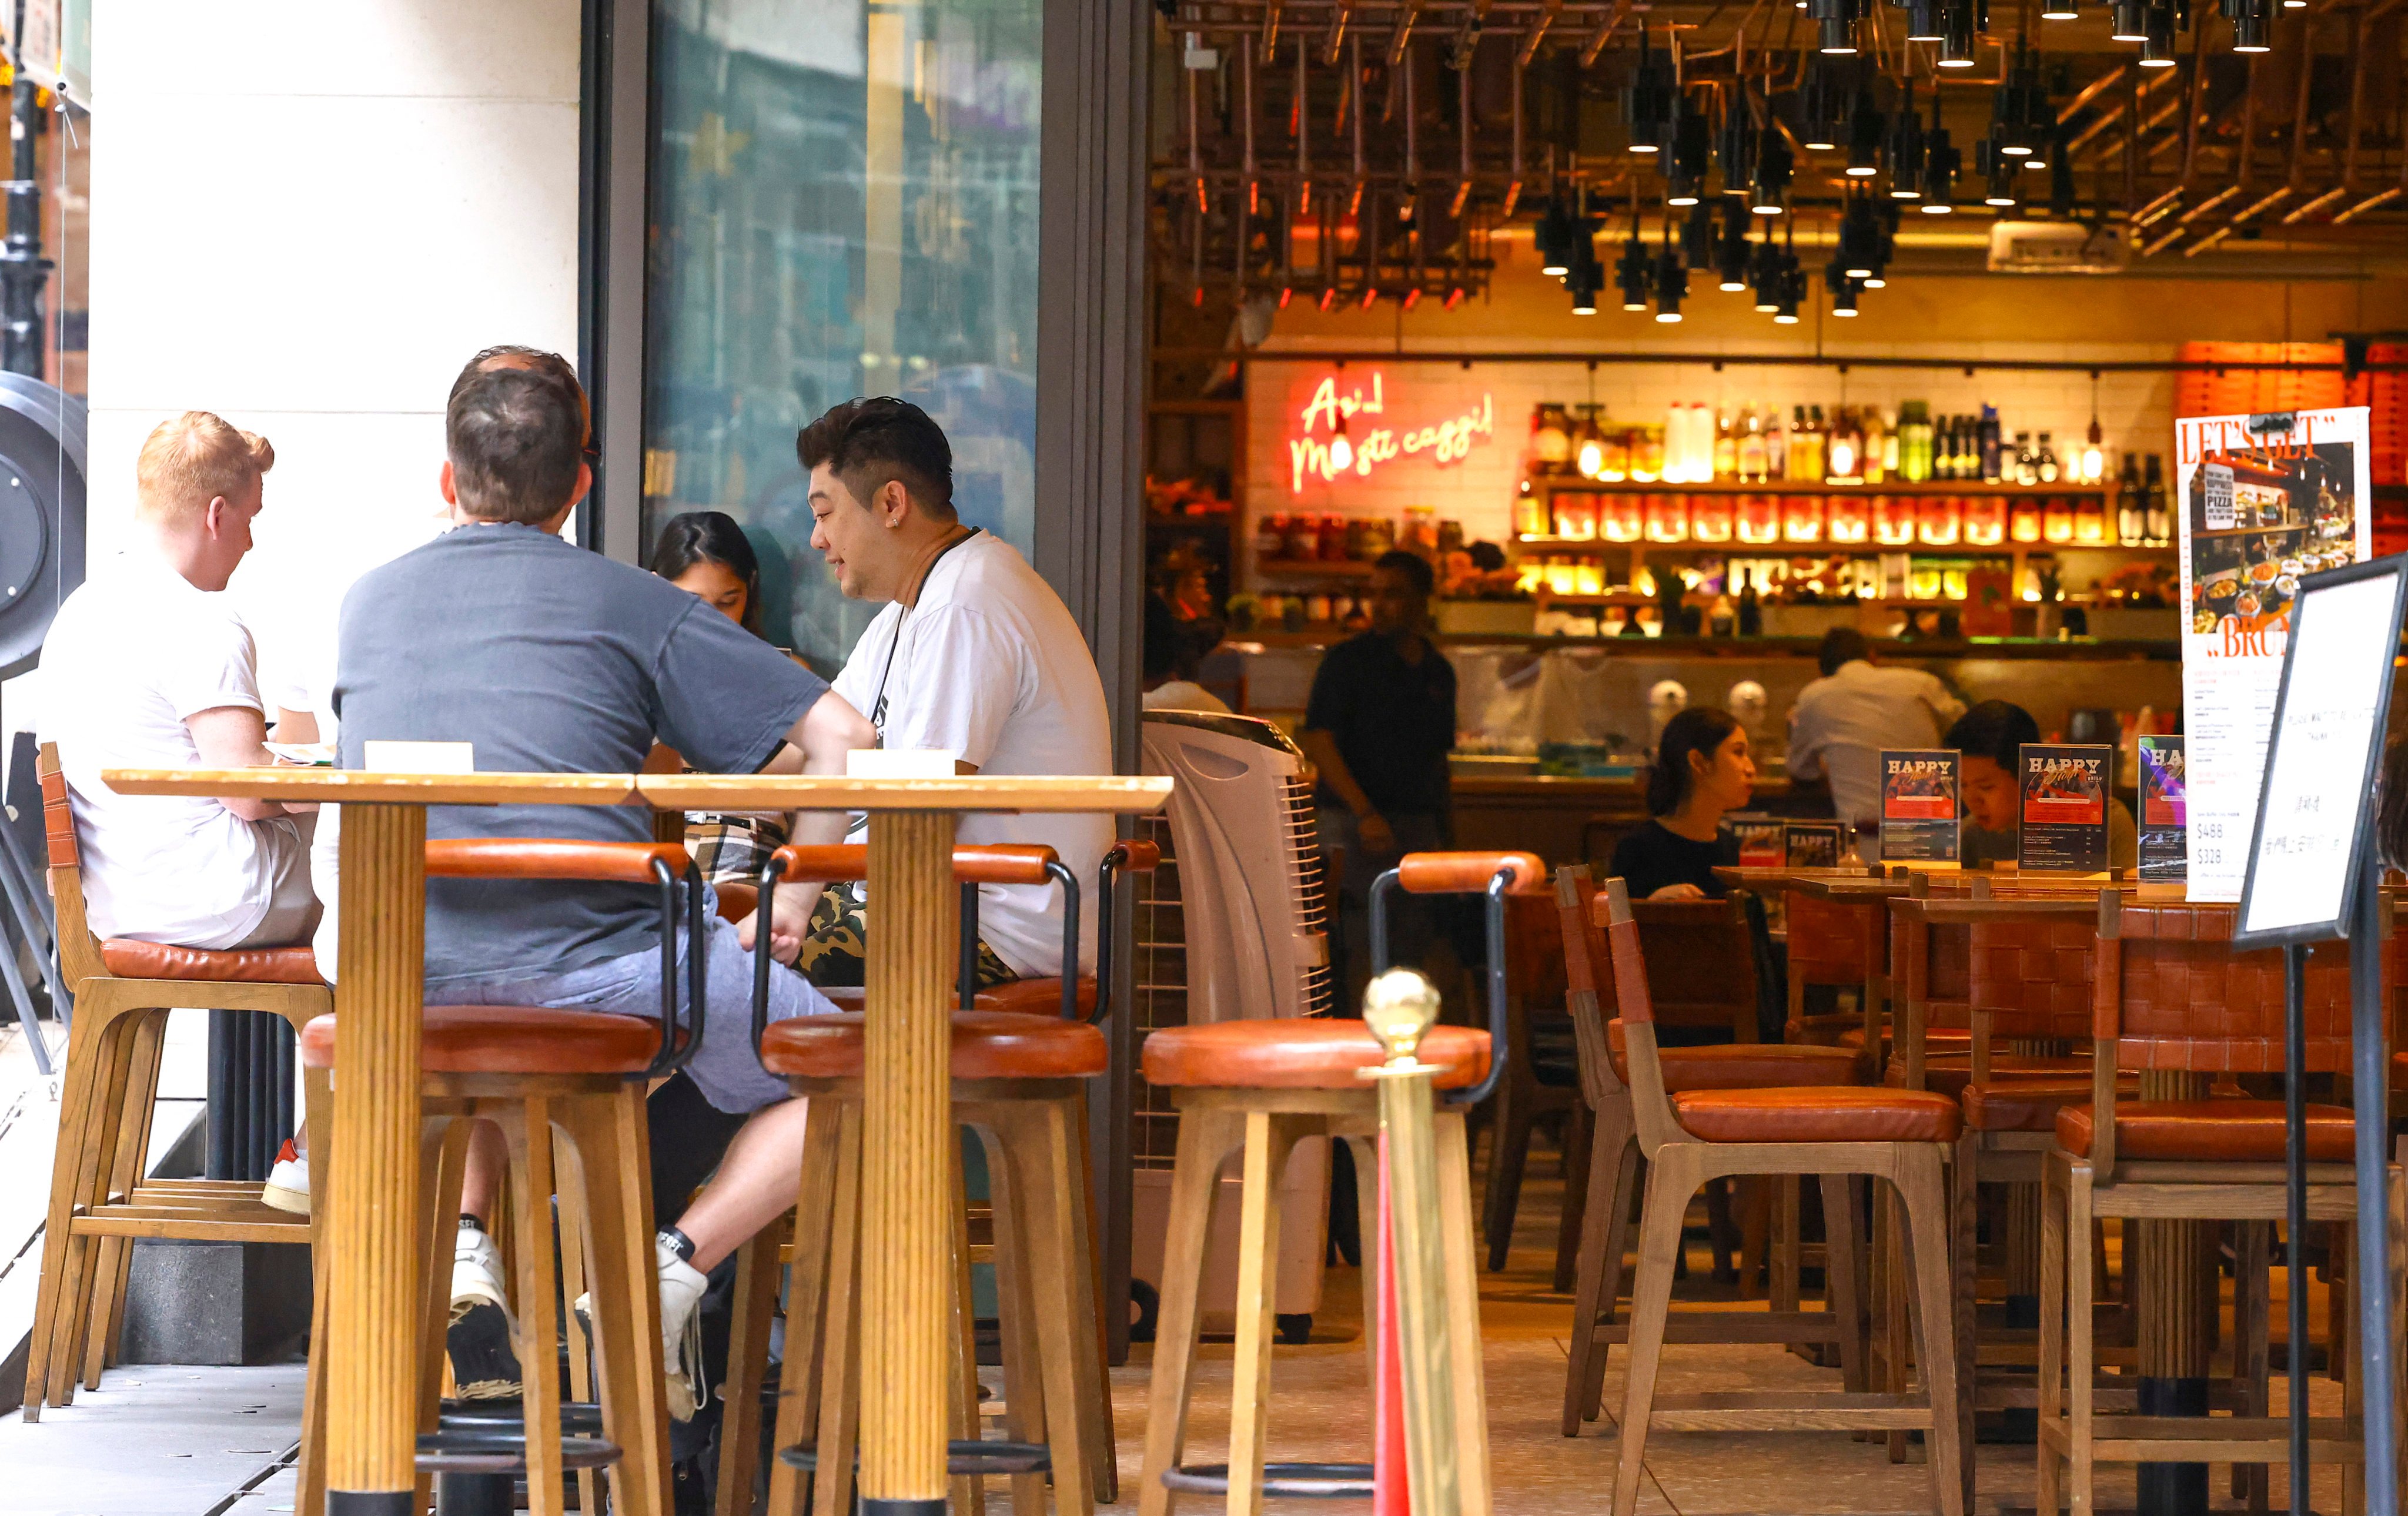 Italian restaurant Baci in Lan Kwai Fong slashed 29 per cent off its HK$188 and HK$98 packages for free-flow drinks as part of the celebrations. Photo: Dickson Lee